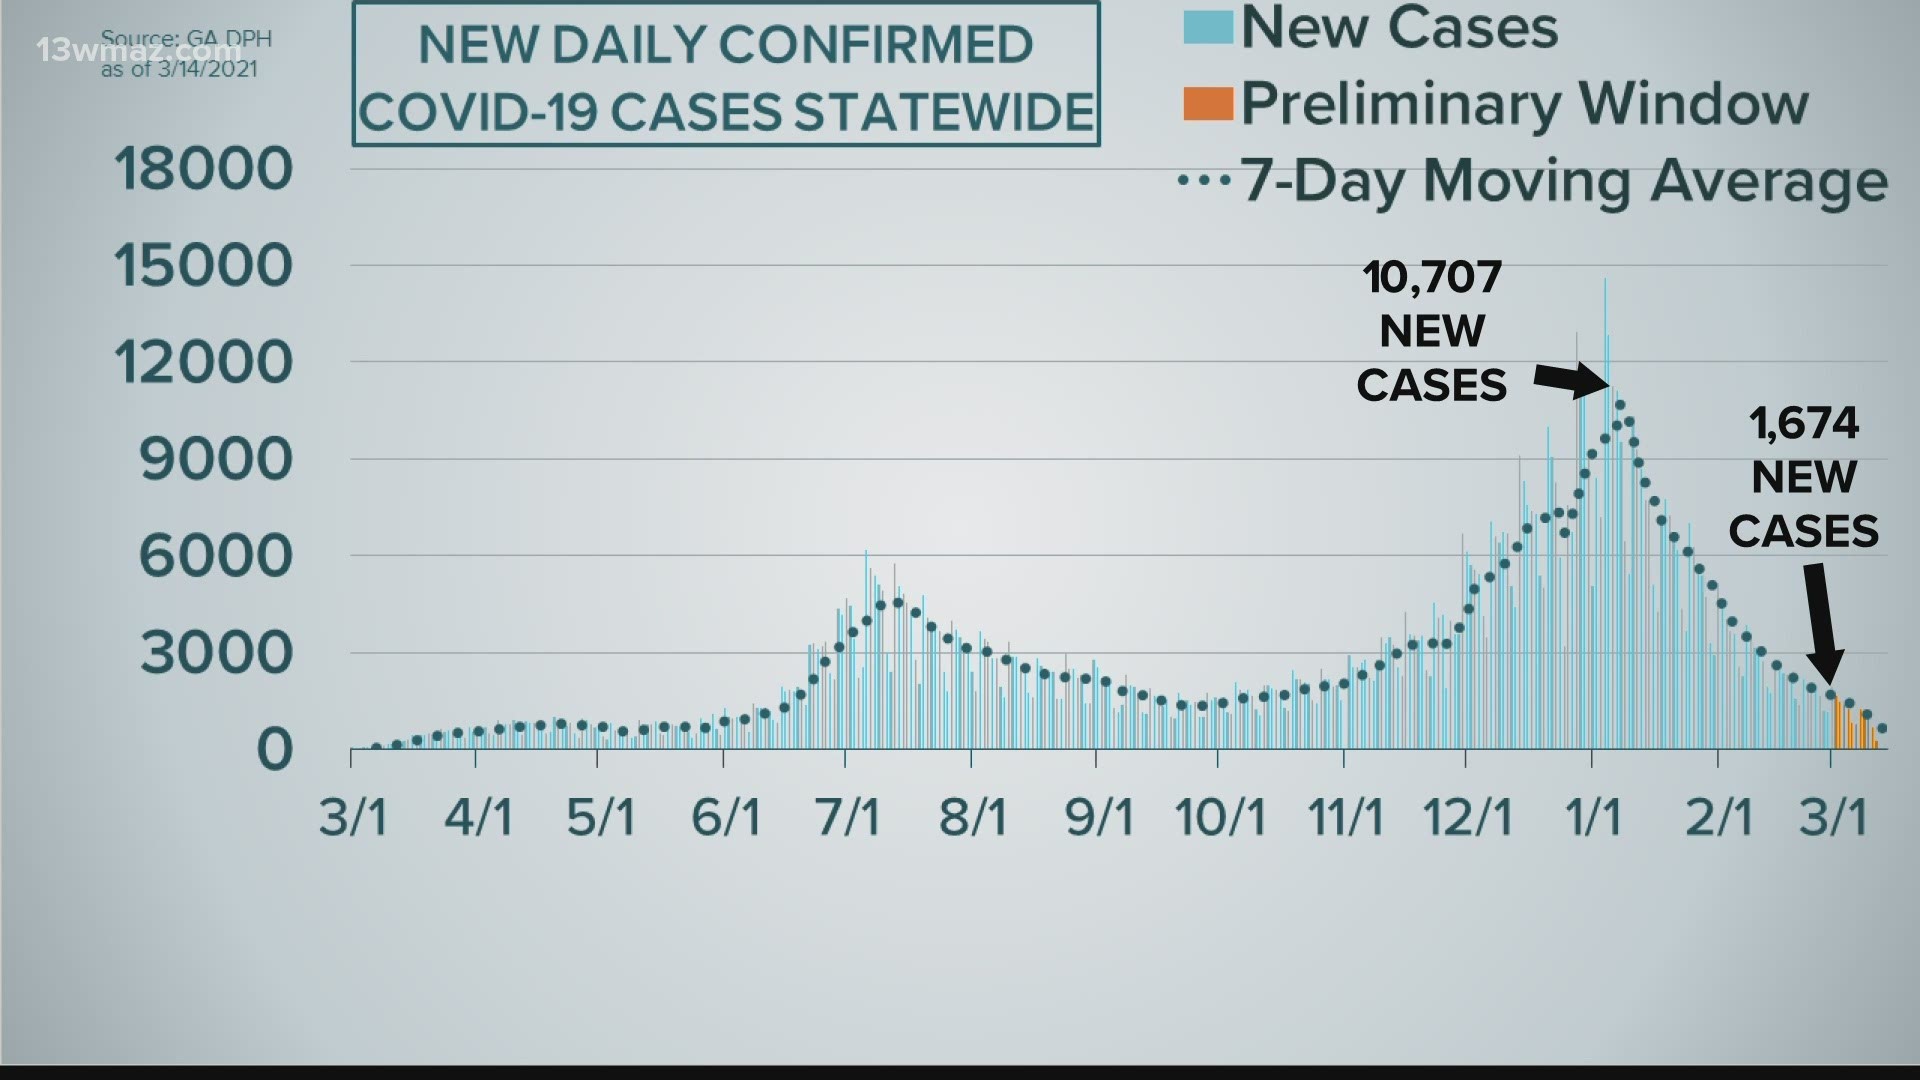 Georgia is inching toward case numbers similar to those reported before the latest surge that started in September.